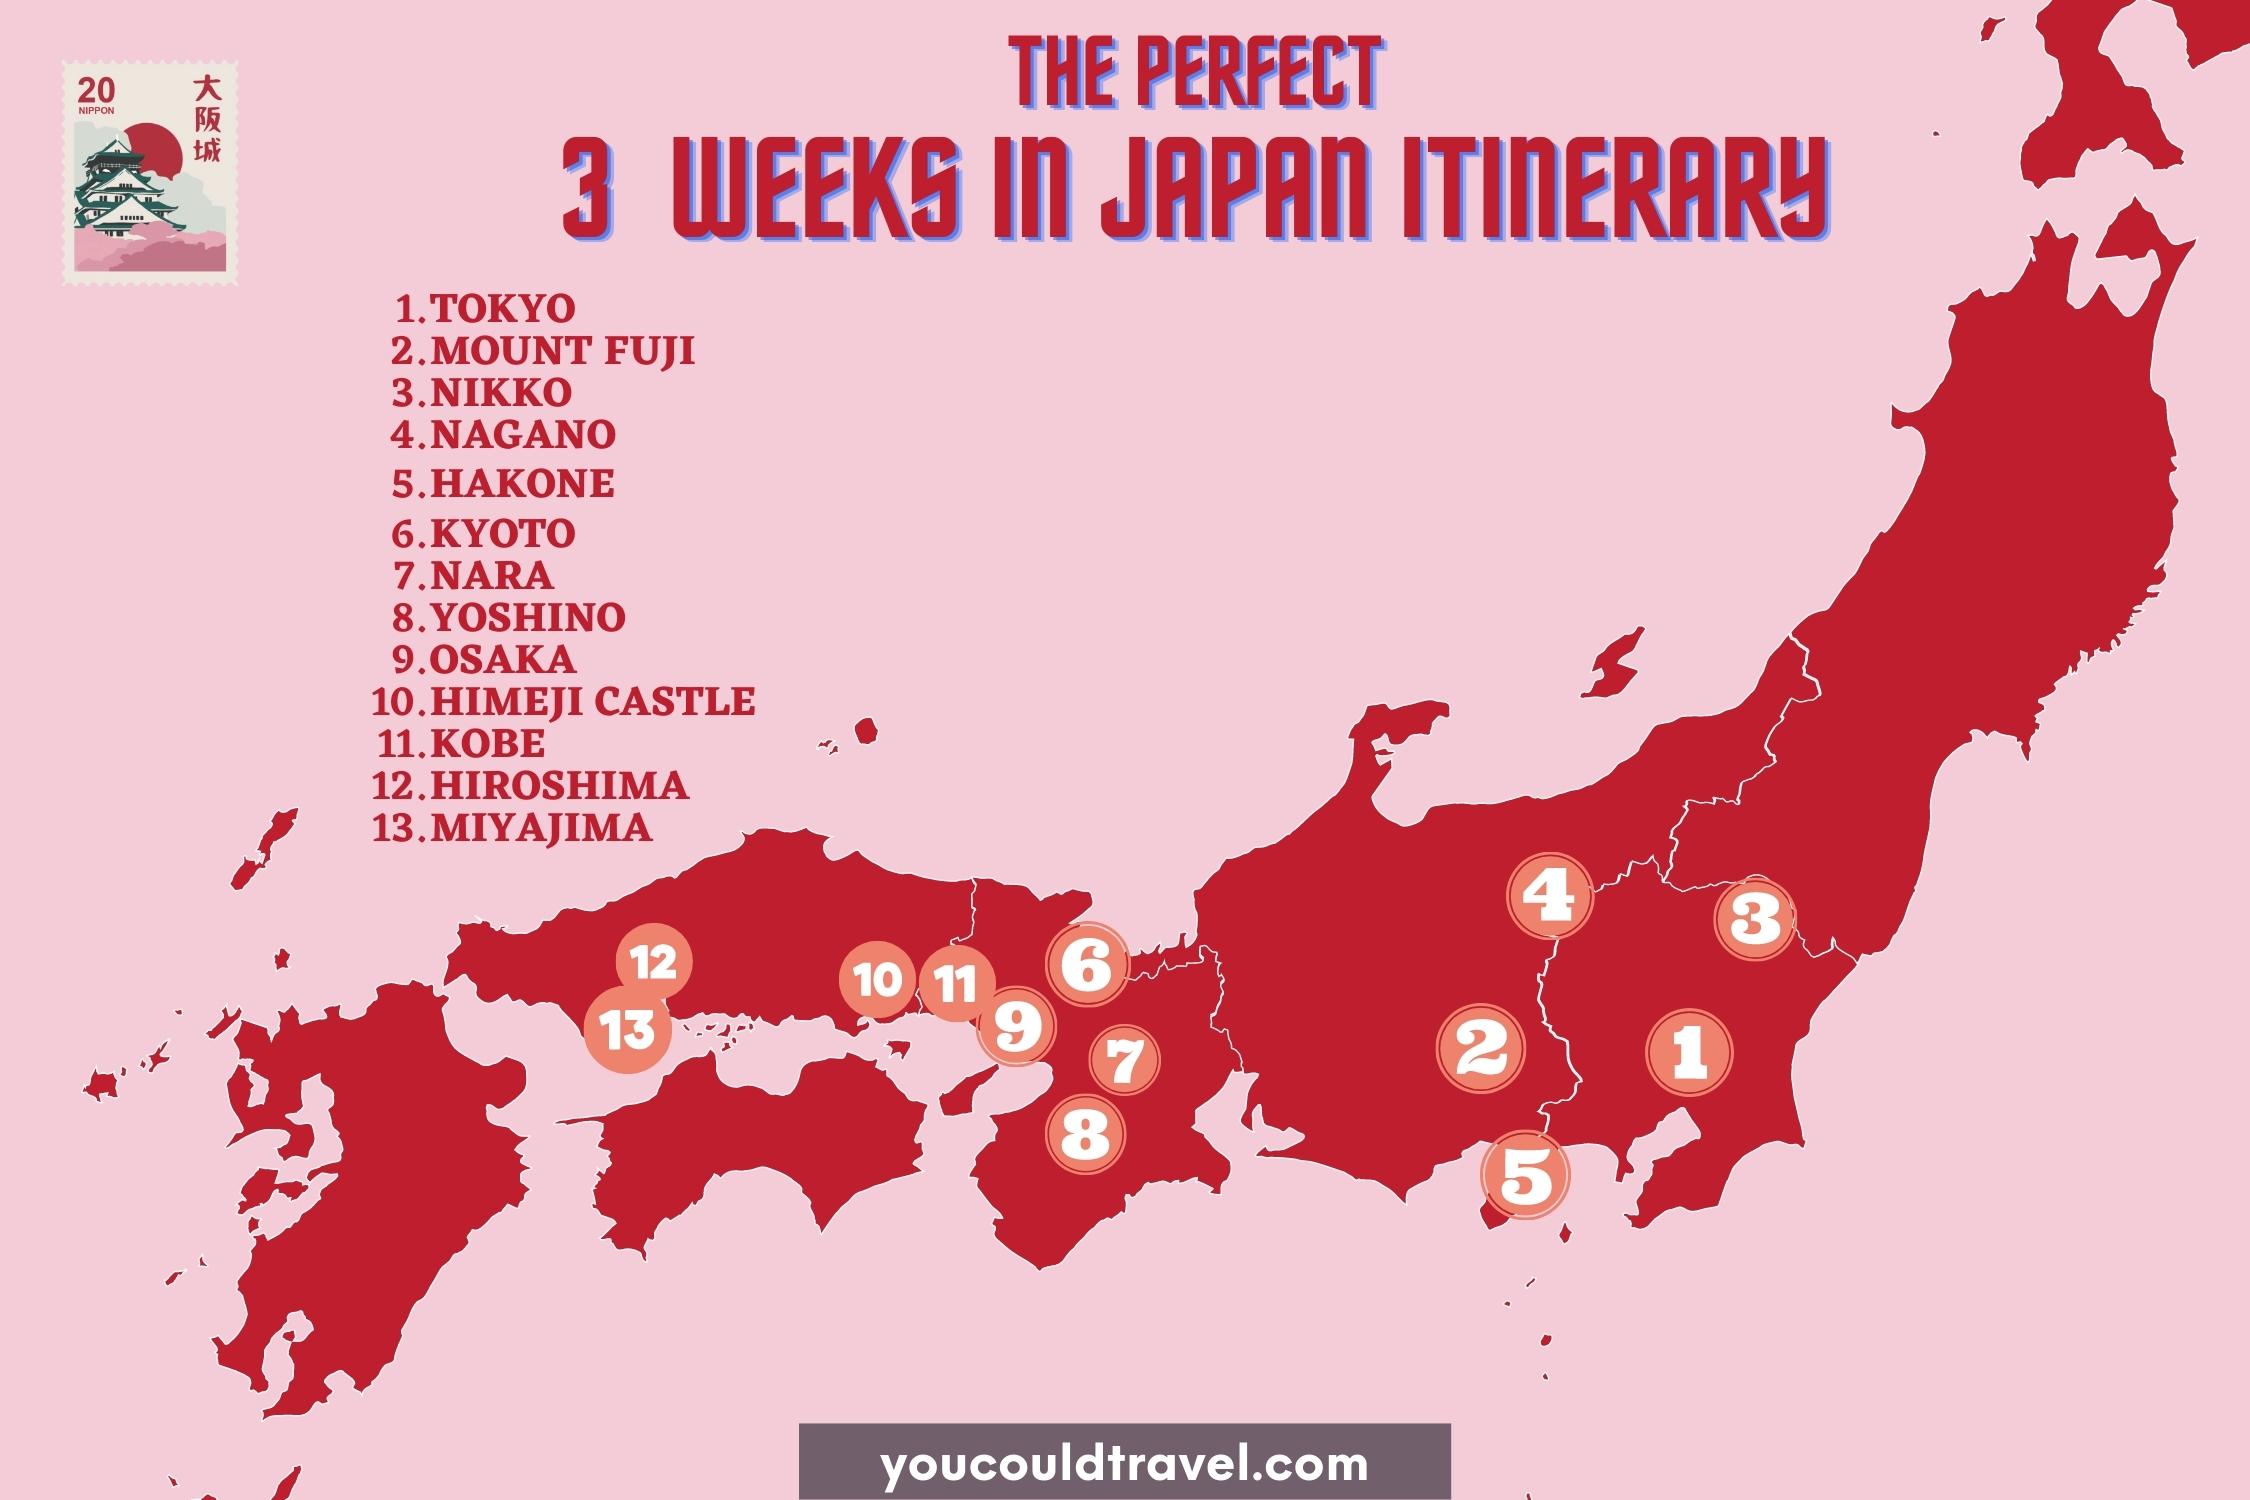 The perfect 3 weeks in Japan itinerary on a digital map